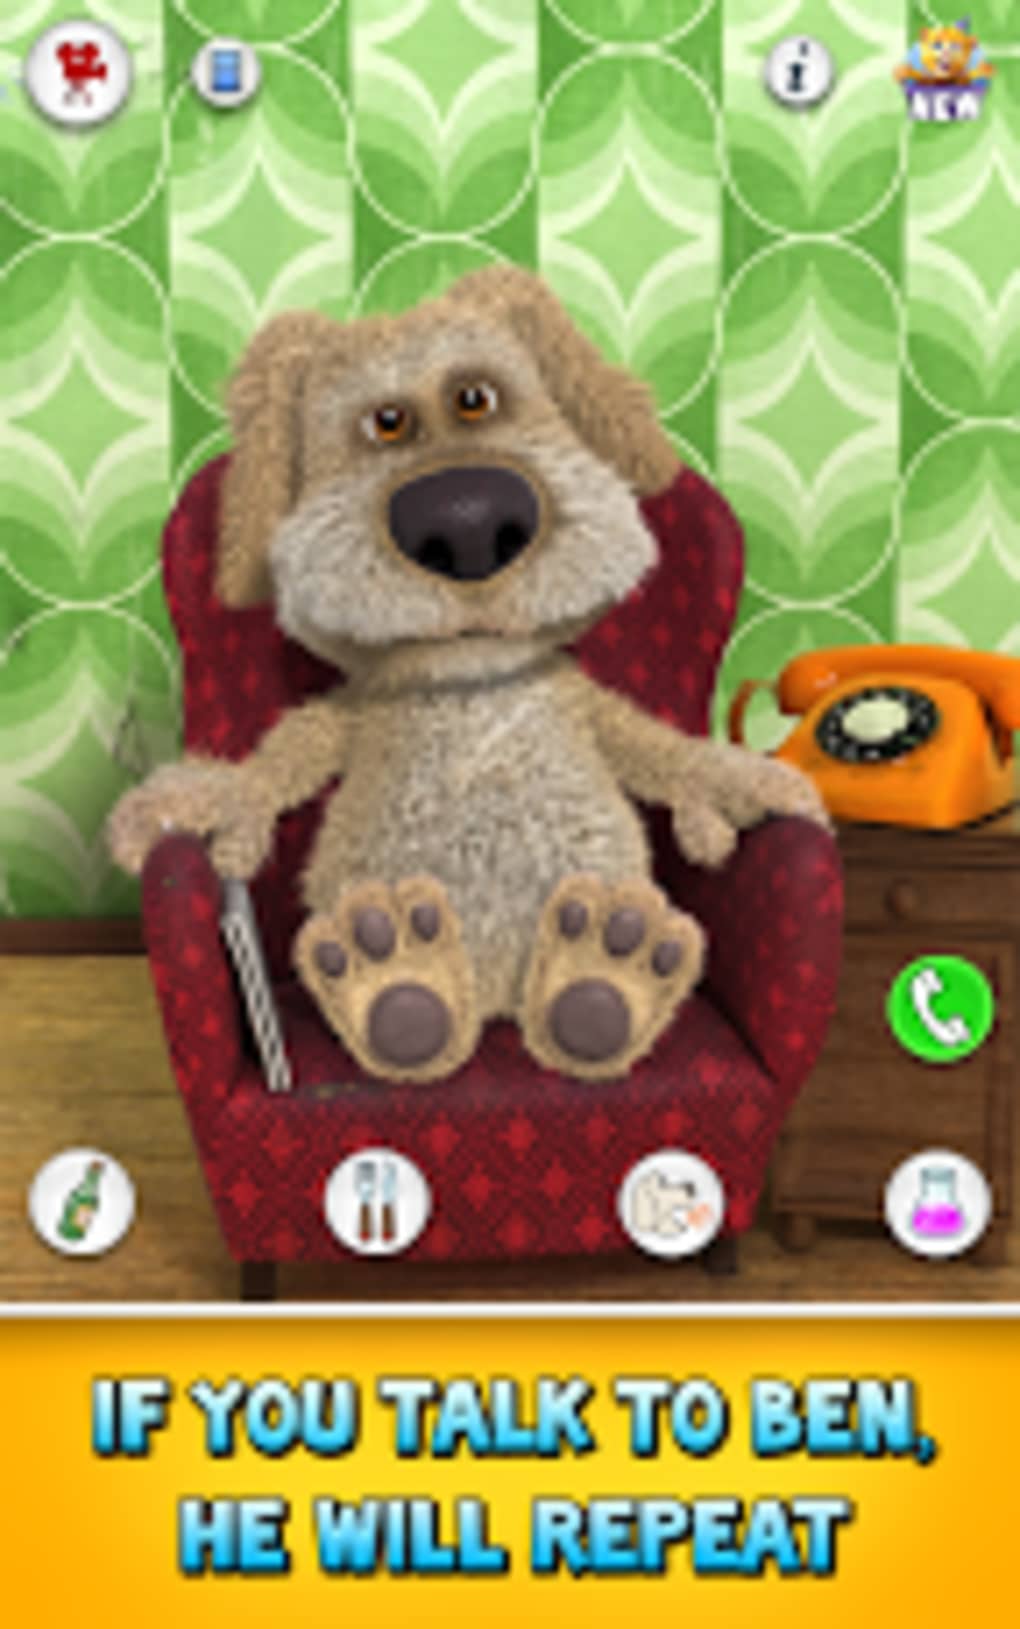 Talking Ben the Dog::Appstore for Android